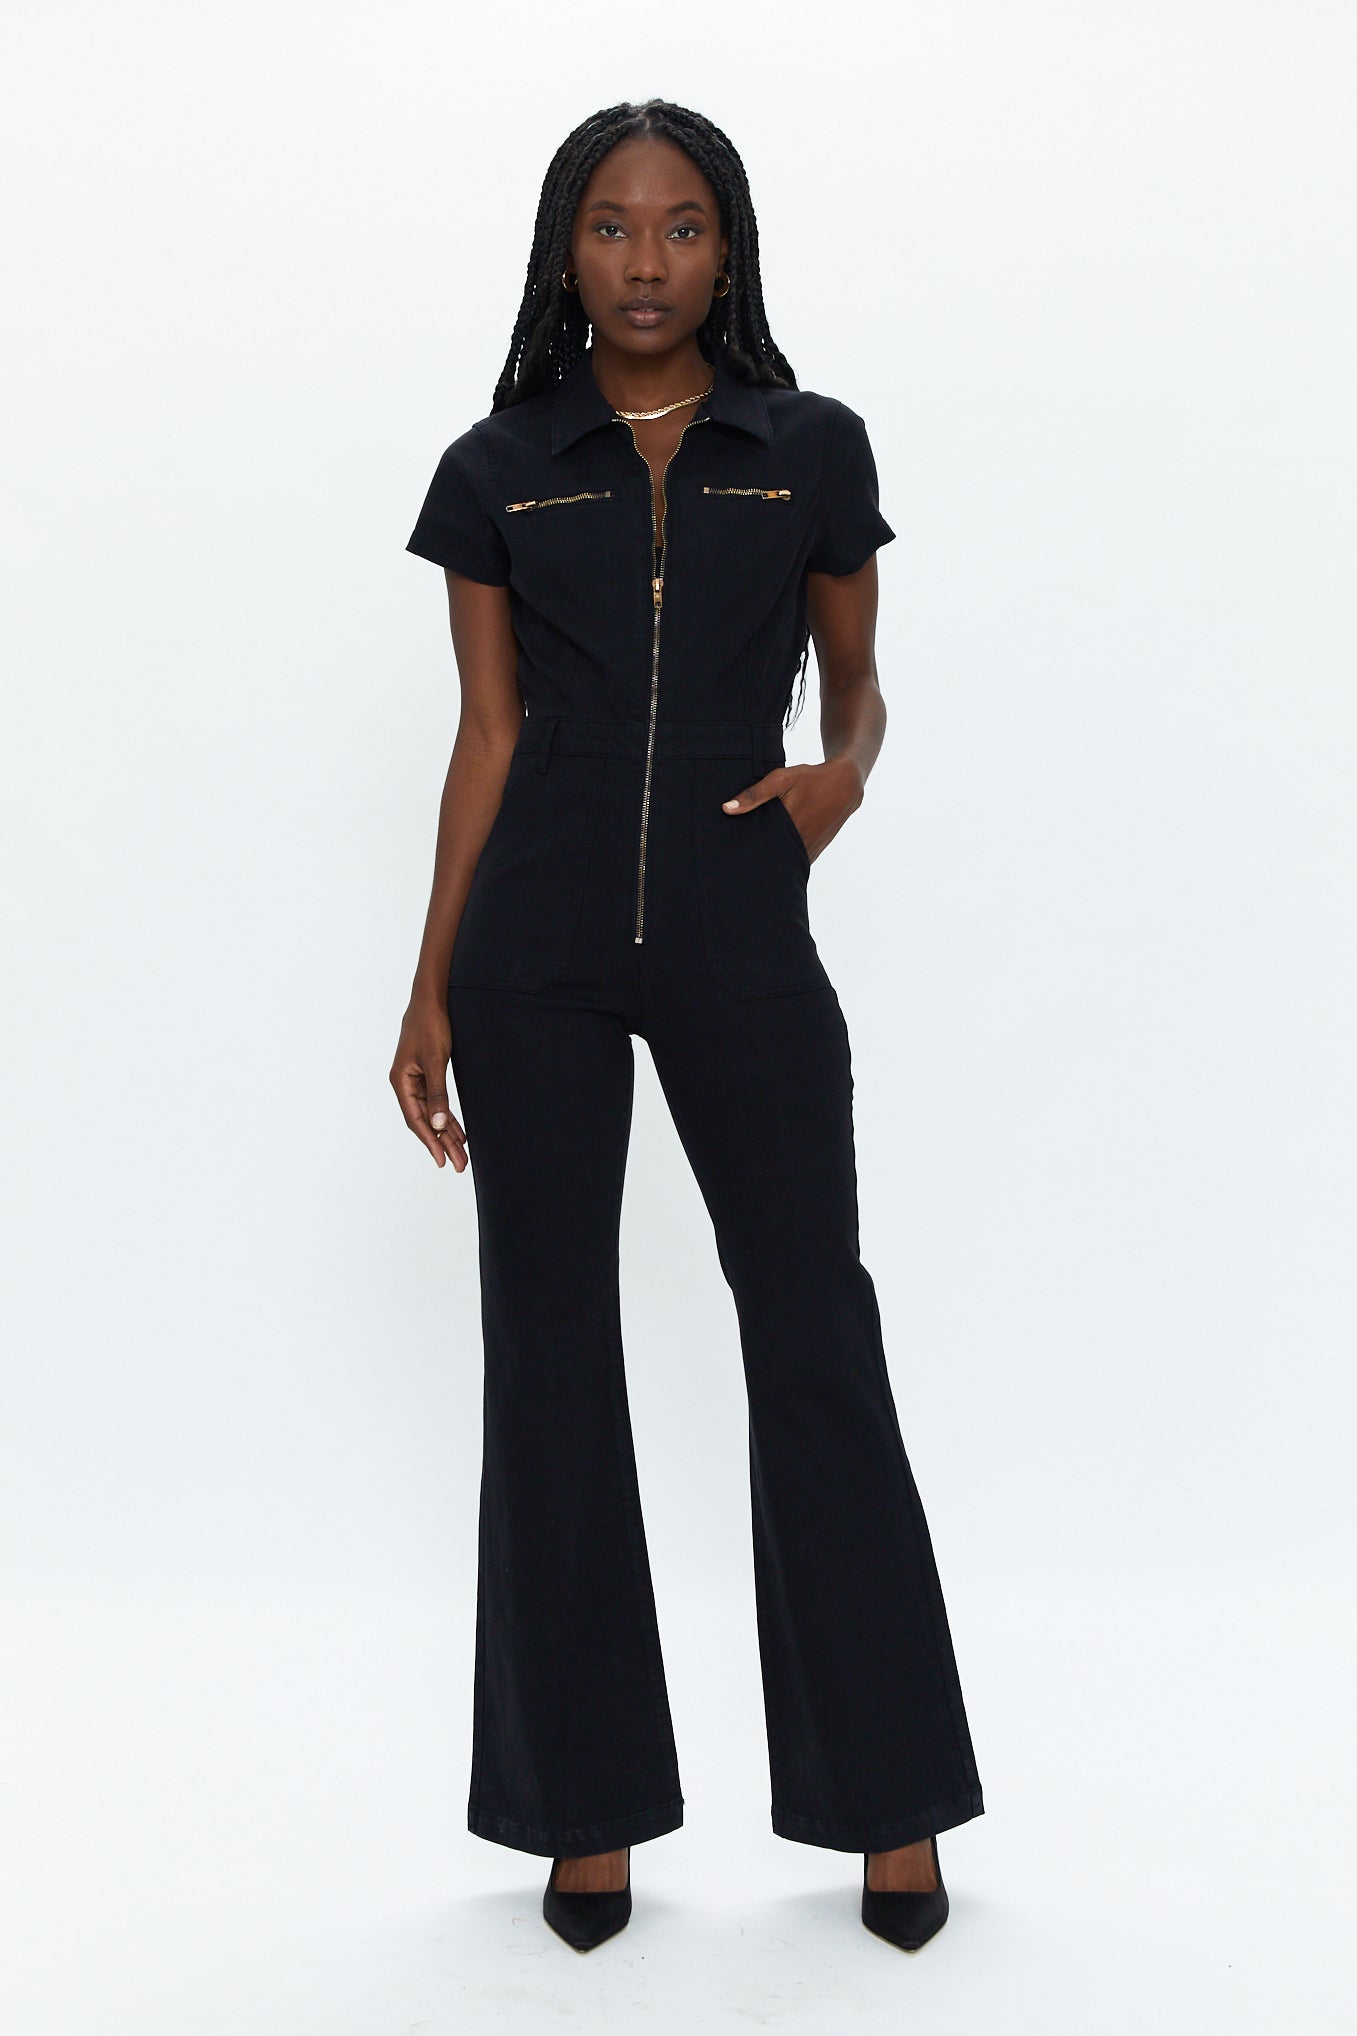 10 Stylish Designs of Denim Jumpsuits for Women and Men